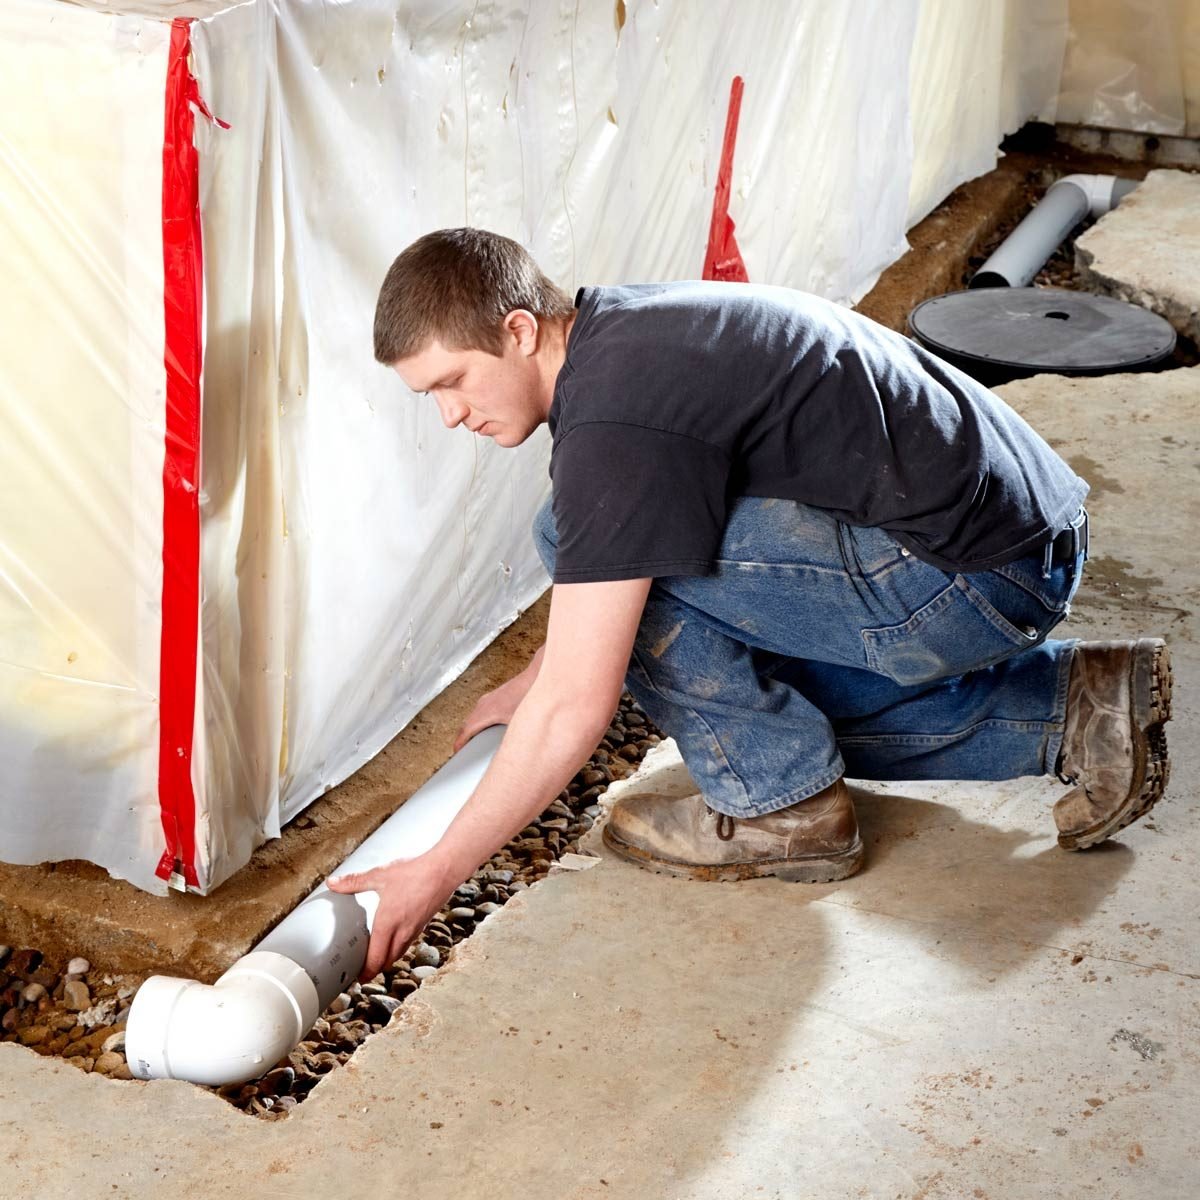 Basement Waterproofing: How to Install a Basement Drainage System